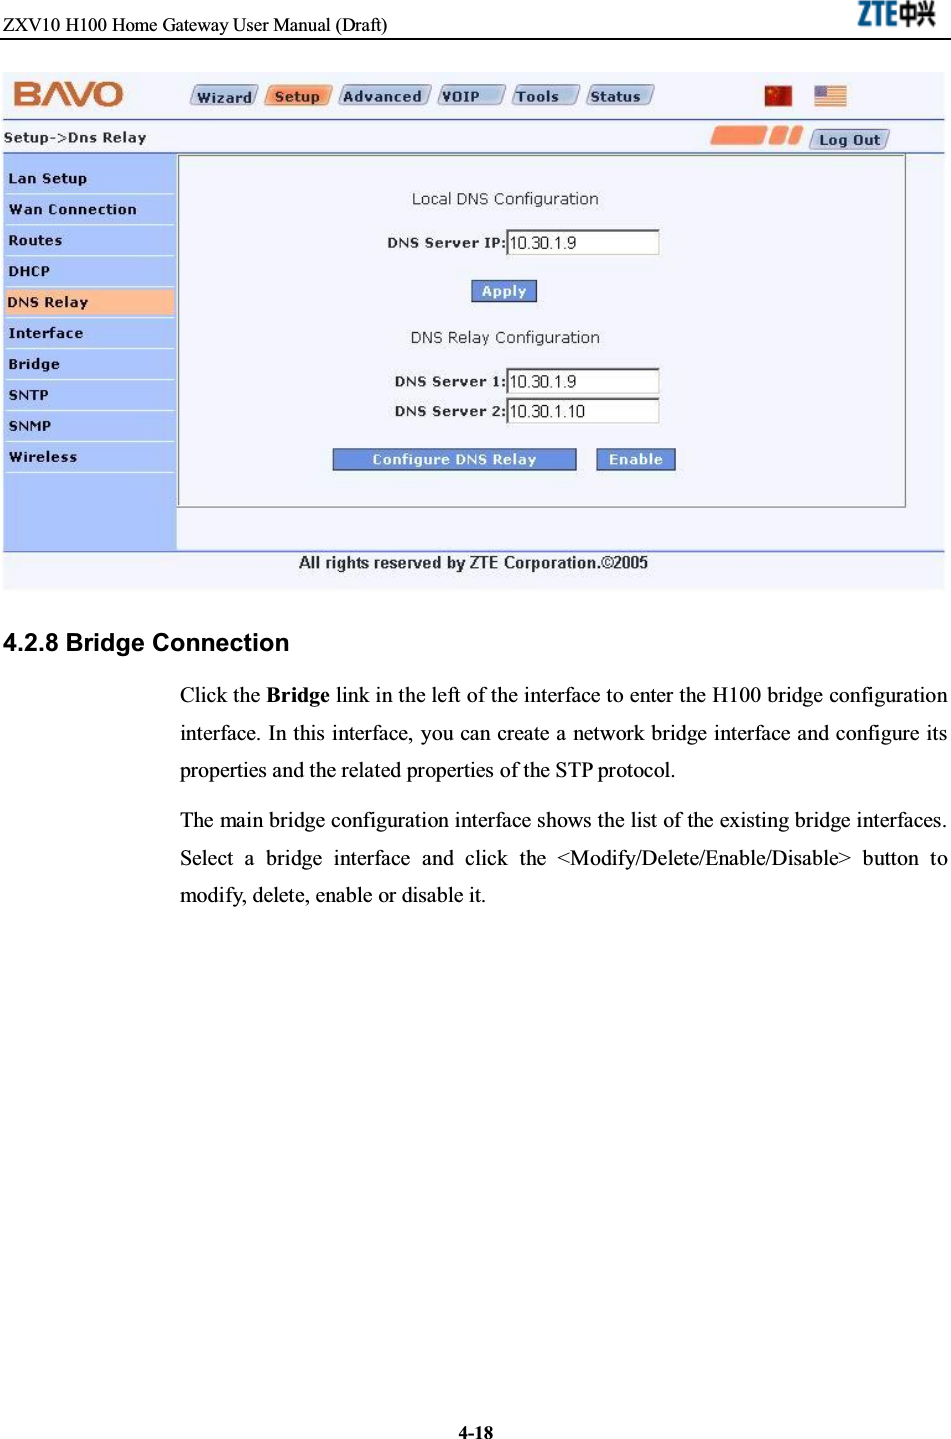 ZXV10 H100 Home Gateway User Manual (Draft)4-184.2.8 Bridge ConnectionClick the Bridge link in the left of the interface to enter the H100 bridge configurationinterface. In this interface, you can create a network bridge interface and configure itsproperties and the related properties of the STP protocol.The main bridge configuration interface shows the list of the existing bridge interfaces.Select a bridge interface and click the &lt;Modify/Delete/Enable/Disable&gt; button tomodify, delete, enable or disable it.